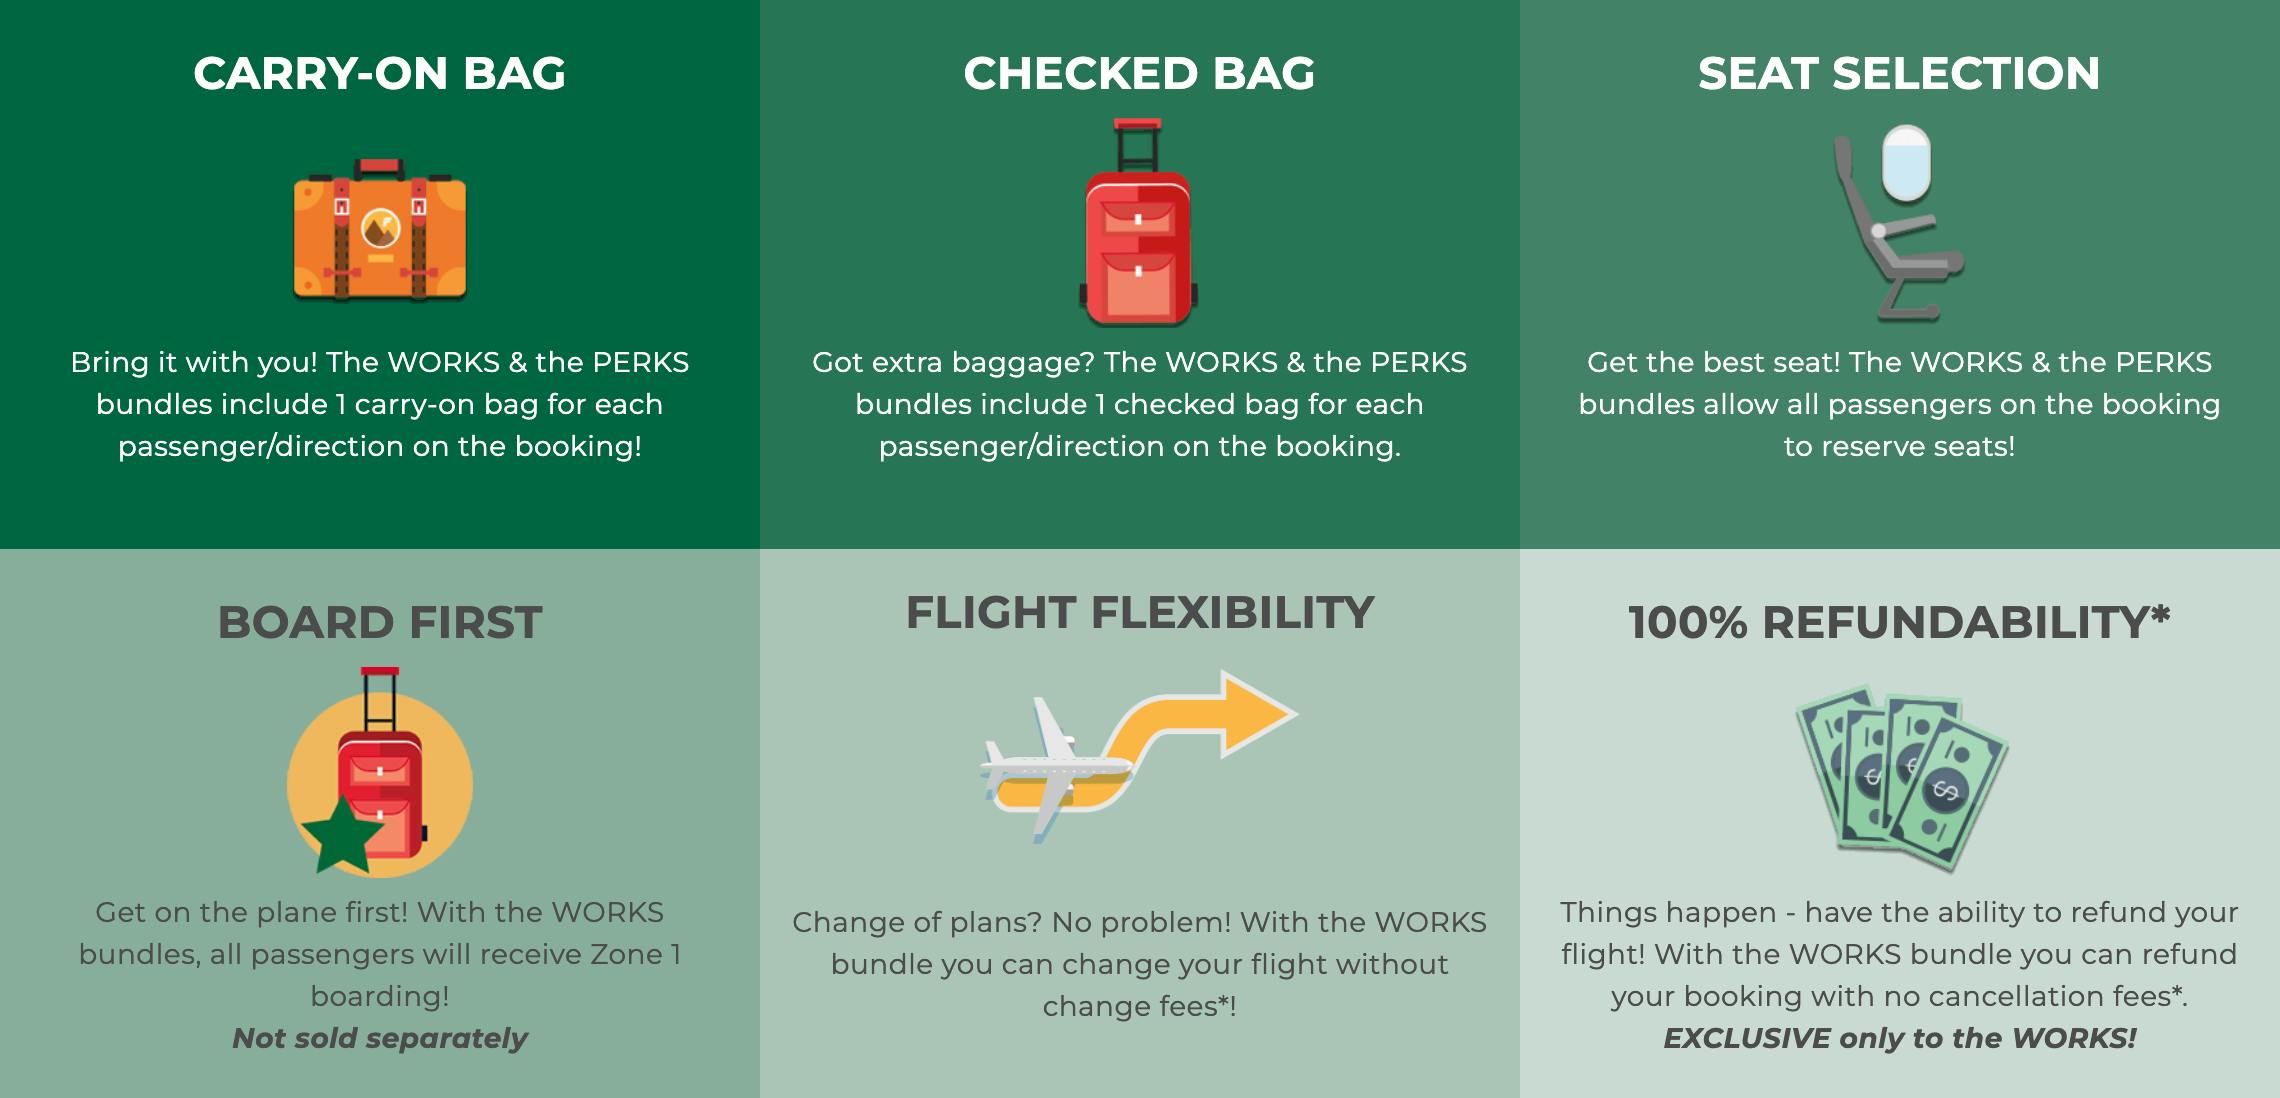 Frontier Baggage Fees How They Work  NerdWallet